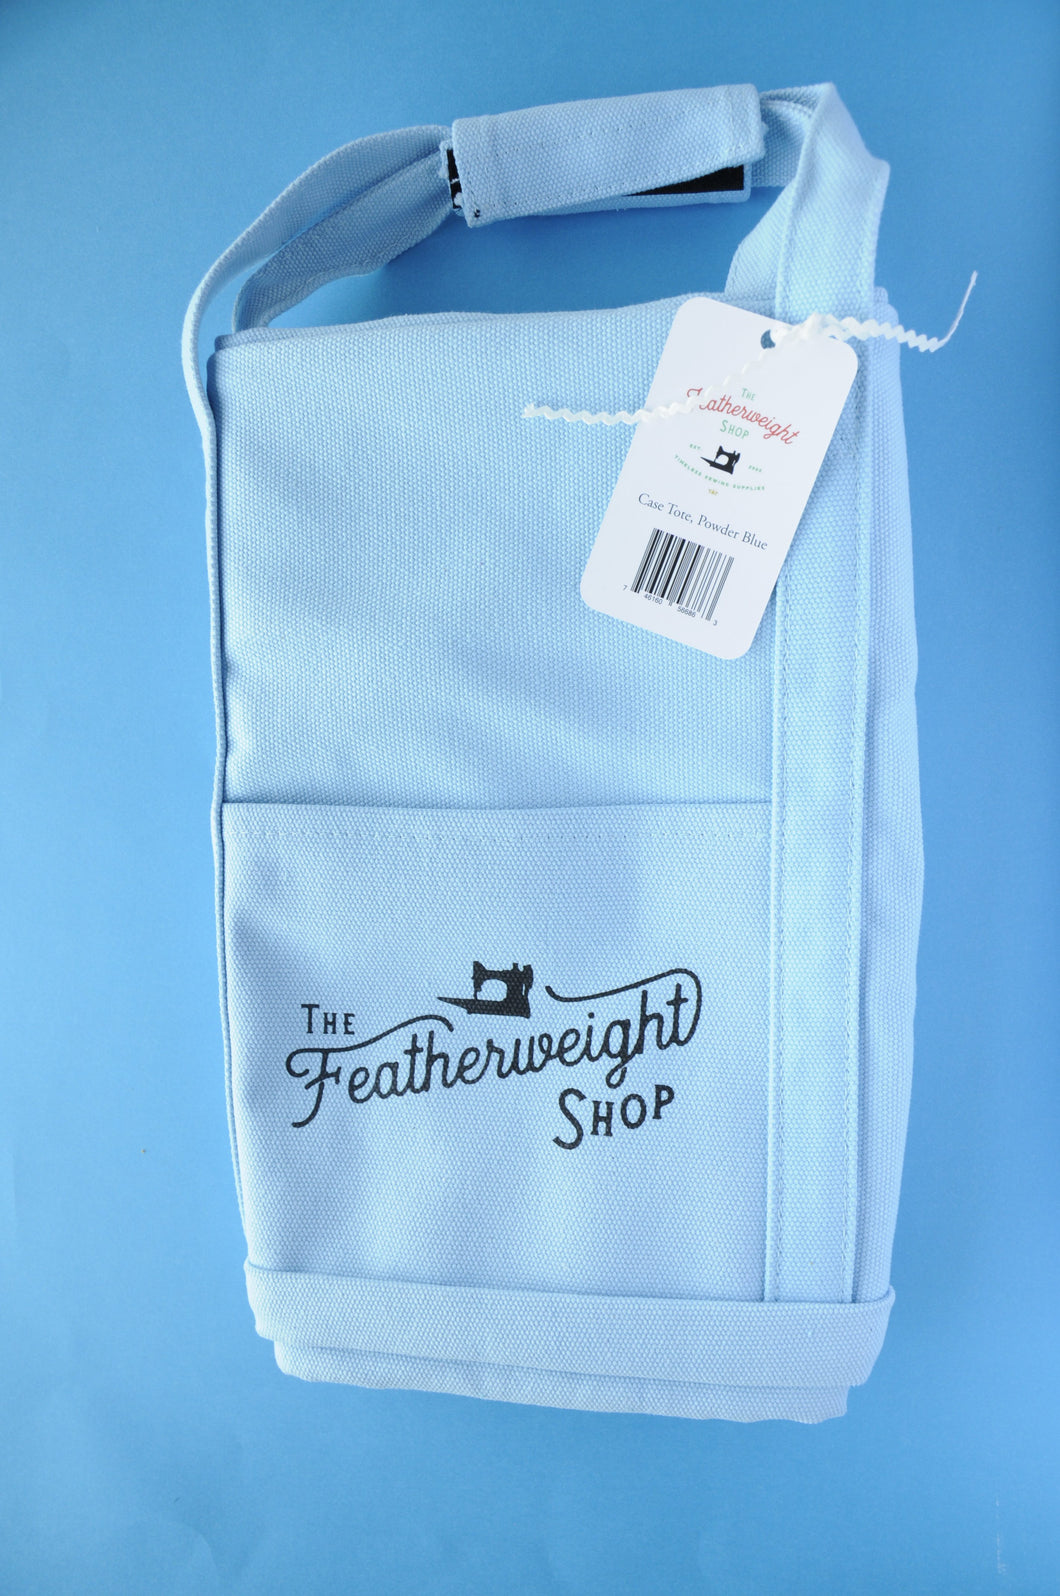 Bag, Tote for Featherweight Case or Tools & Accessories - Light Blue